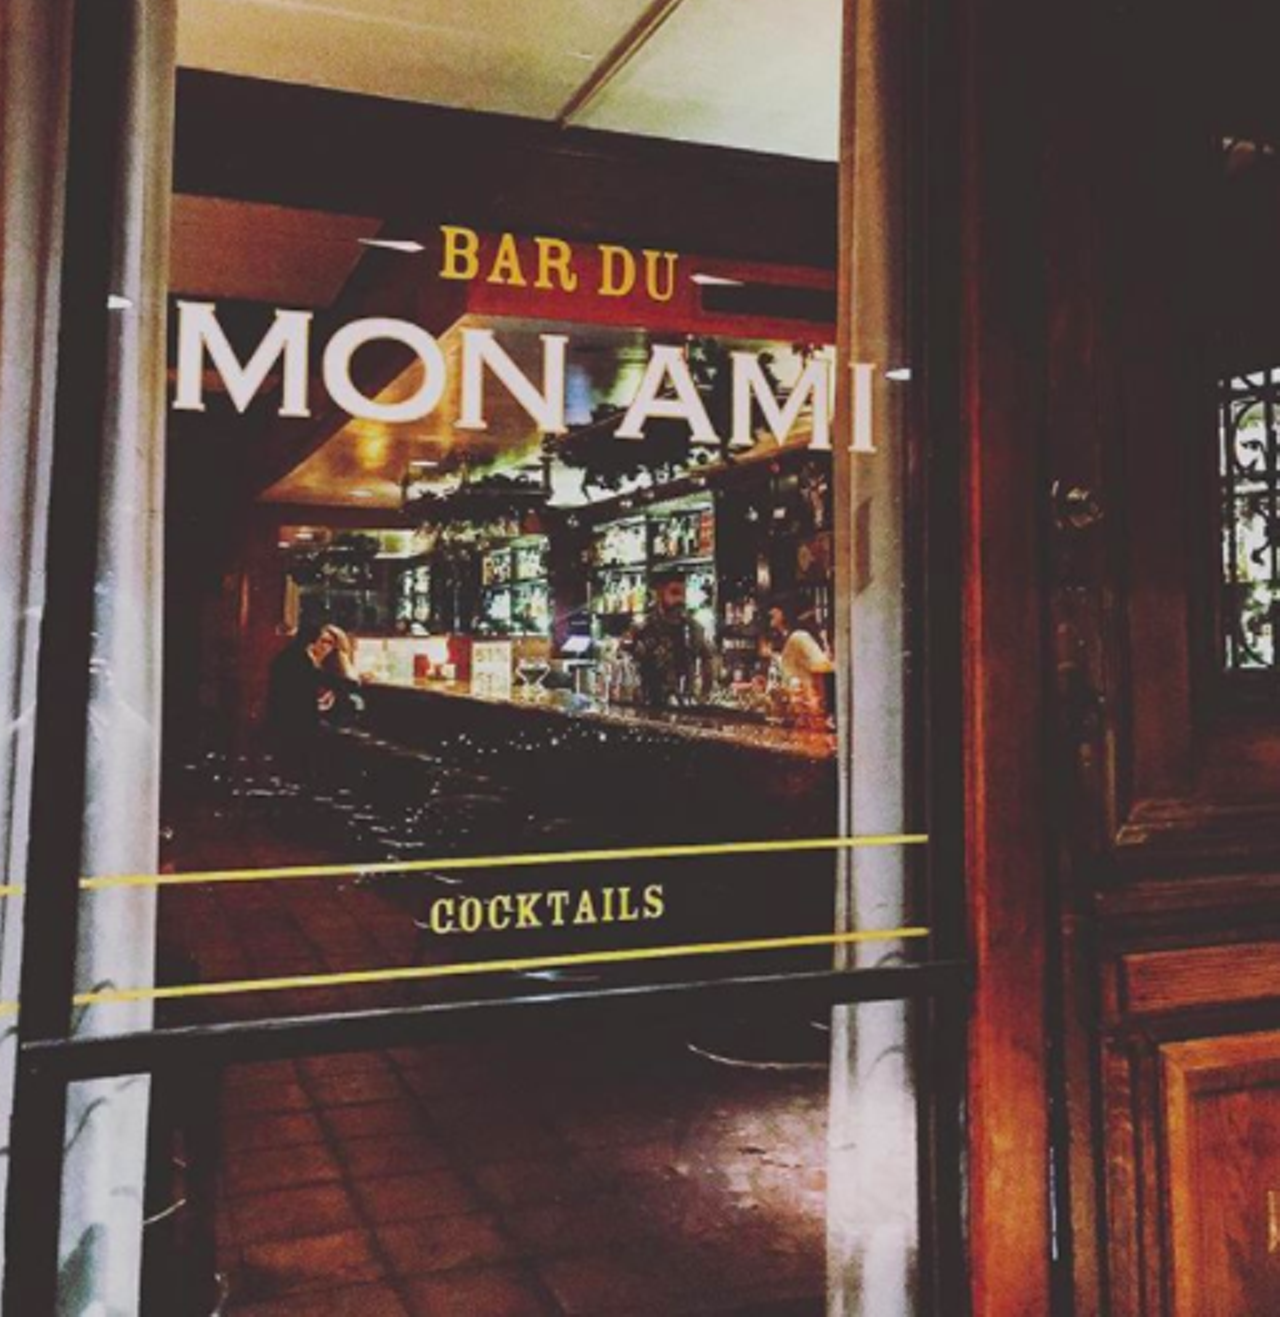 6. Bar du Mon Ami
4901 Broadway St, (210) 740-9229, bardumonami.com
“This casual, laid-back neighborhood bar is perfect for a cozy evening of drinks and conversation with friends. The dimly lit space is inviting, intimate, and the low hum of electronica in the background relaxes you while the perfectly crafted cocktails ease you out of the hustle of the day. Cheers!” – Heather M.
Photo via Instagram / mollg